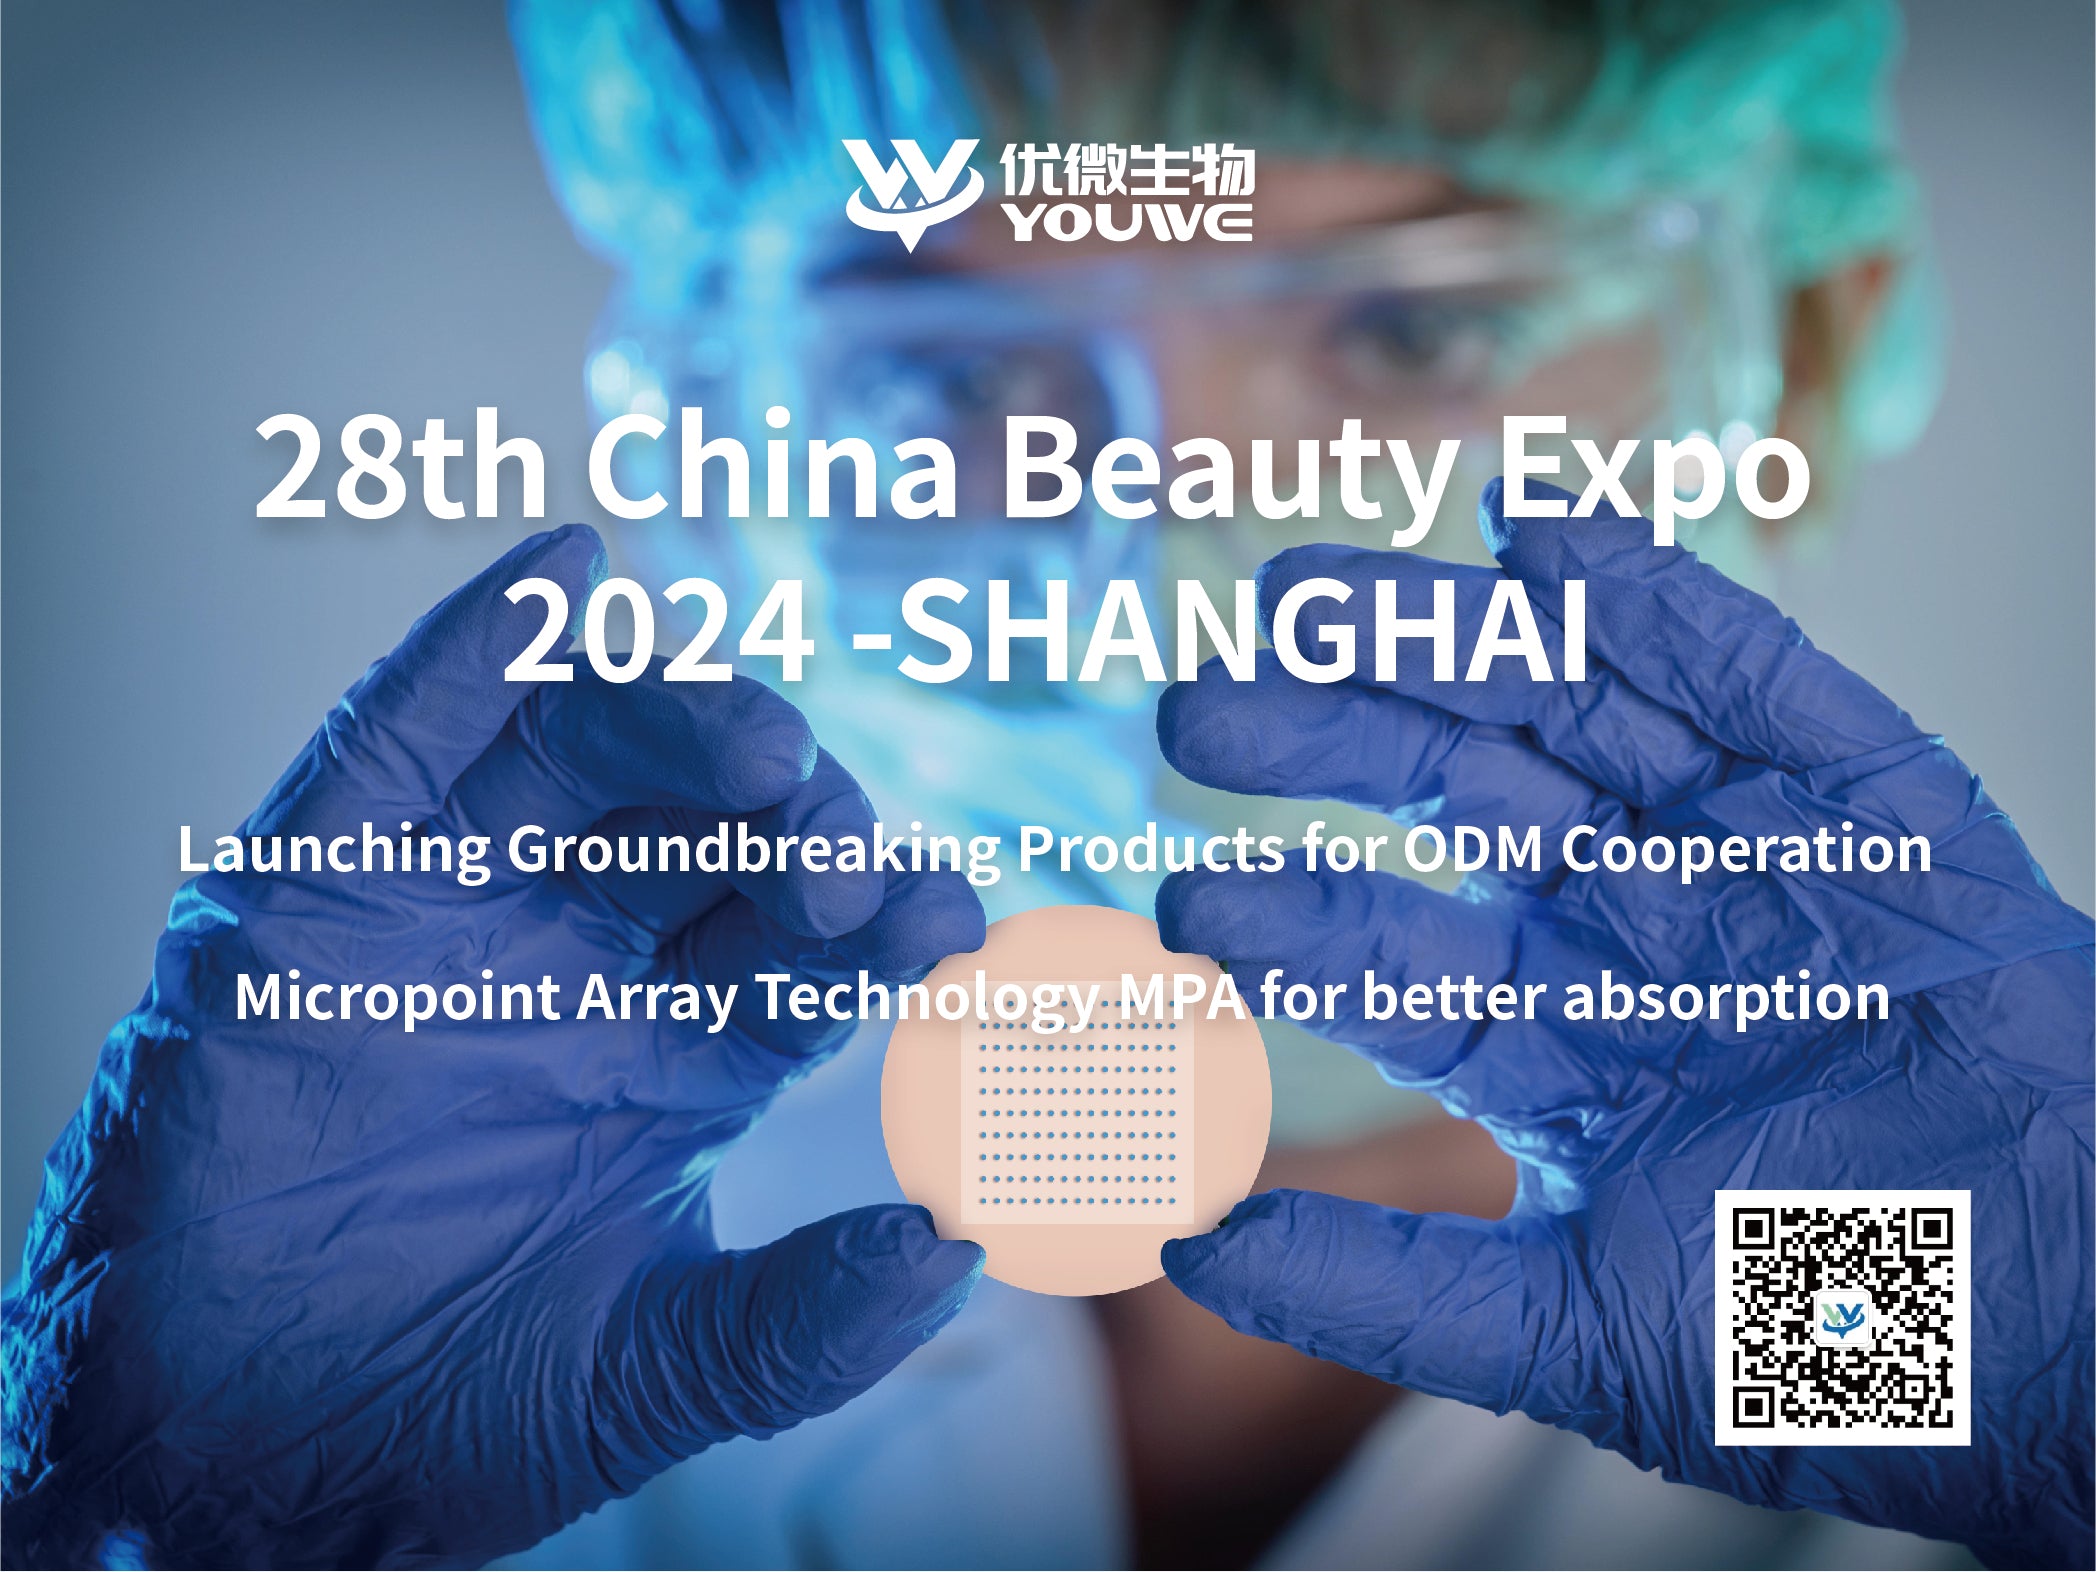 YOUWE Shines at the 28th China Beauty Expo with Its Innovative Beauty Products